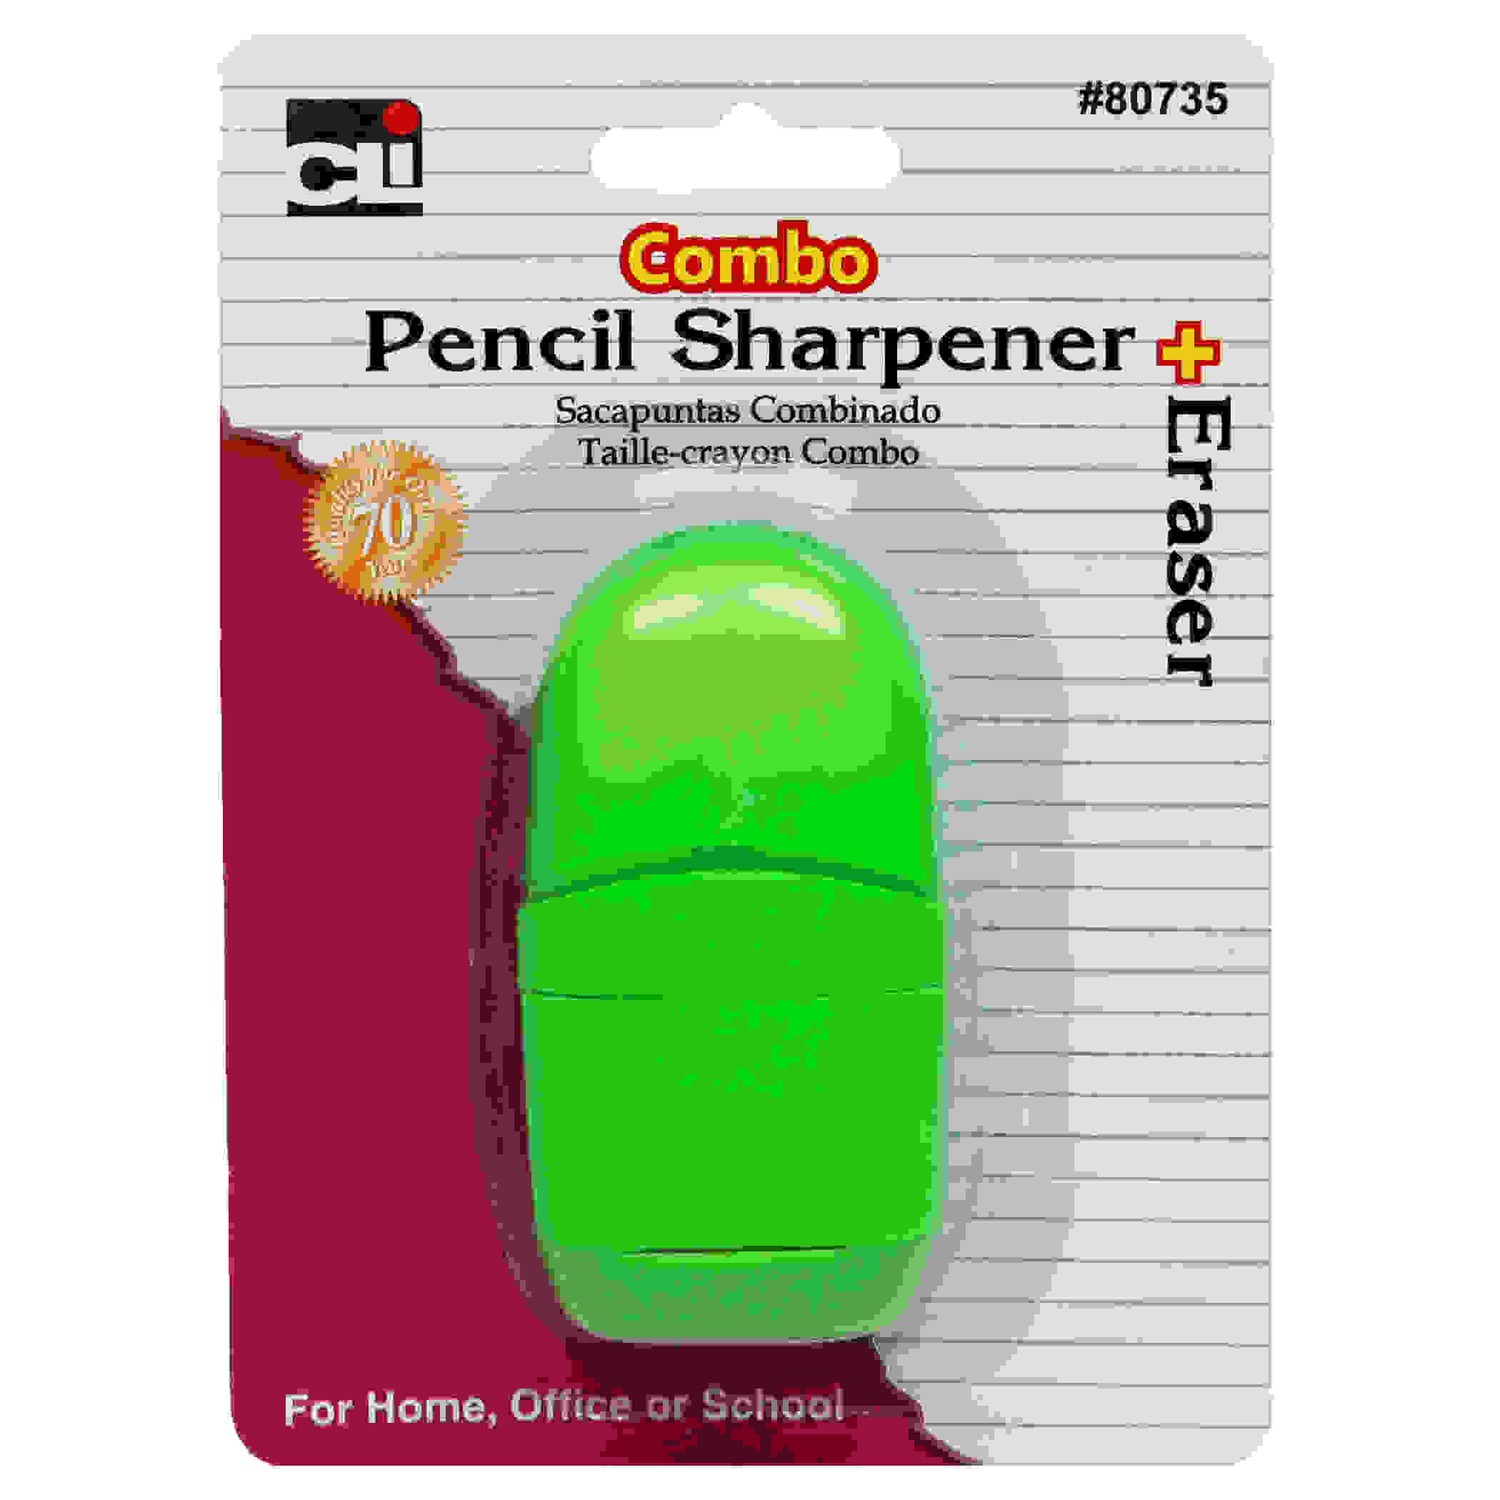 Pencil Sharpener/Eraser Combo, 1 Hole with Eraser, Plastic, with Receptacle, Assorted Colors